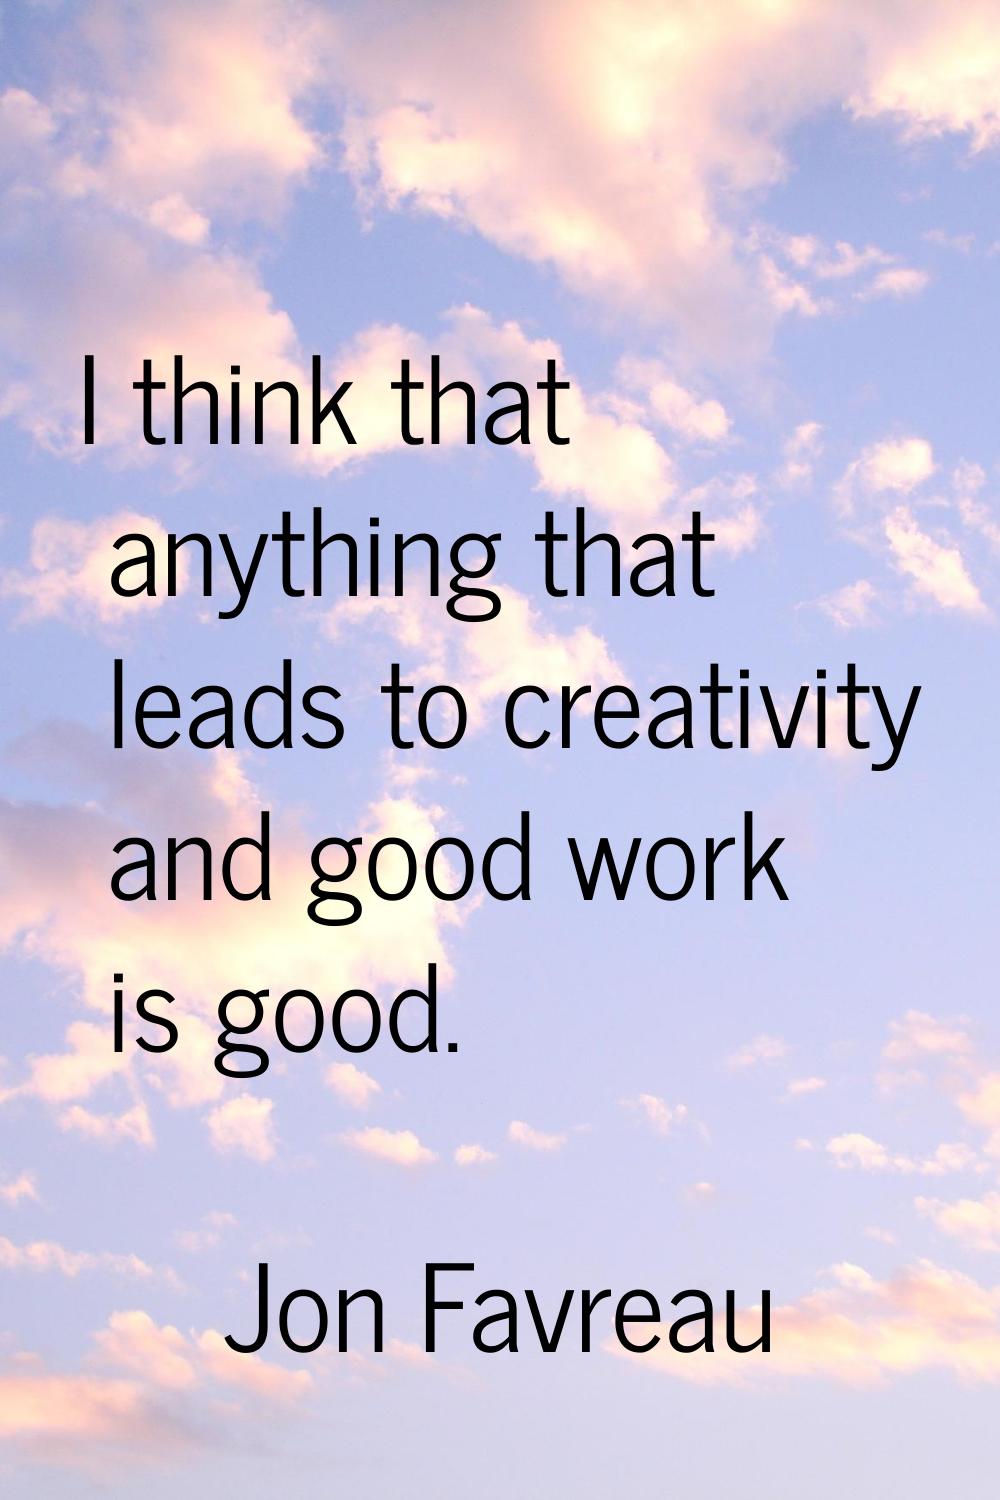 I think that anything that leads to creativity and good work is good.